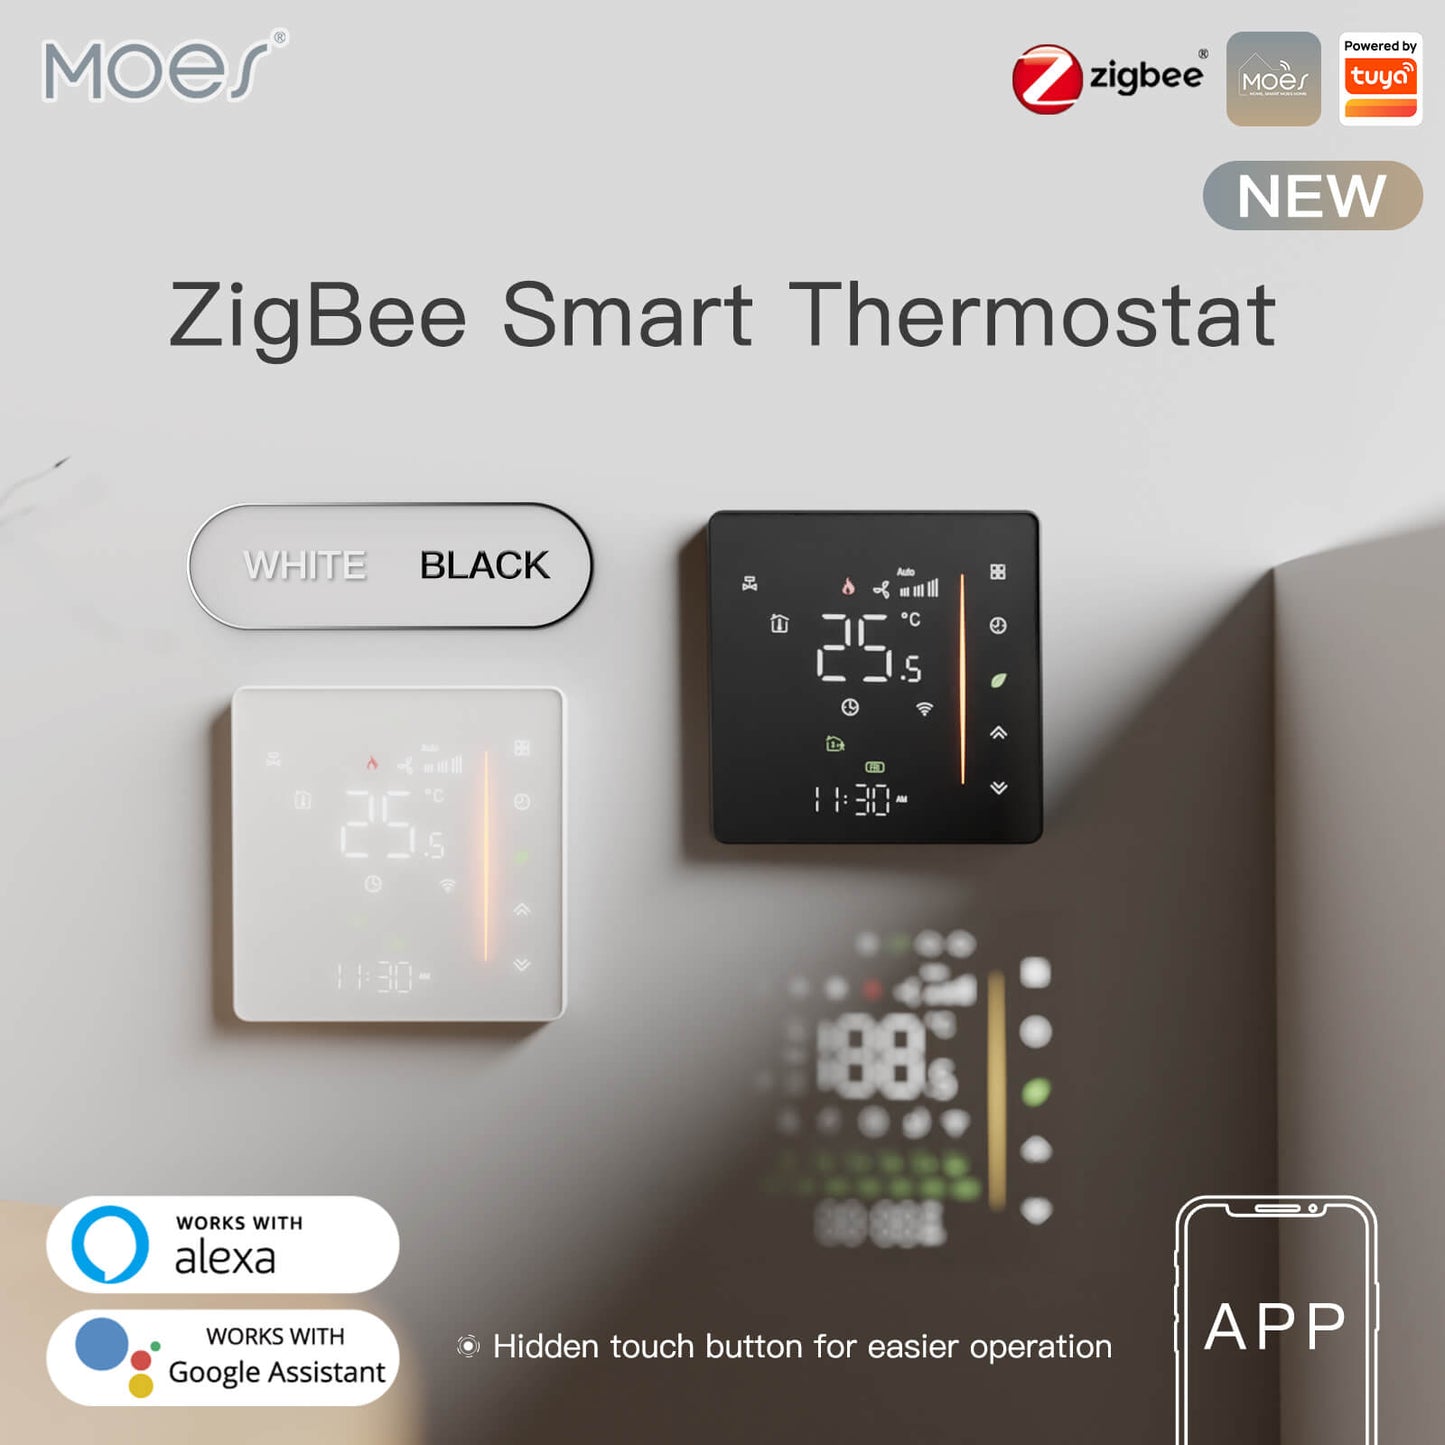 Zigbee Smart Thermostat Gas/Water Heater, Room Thermostat Digital Programmable - MOES